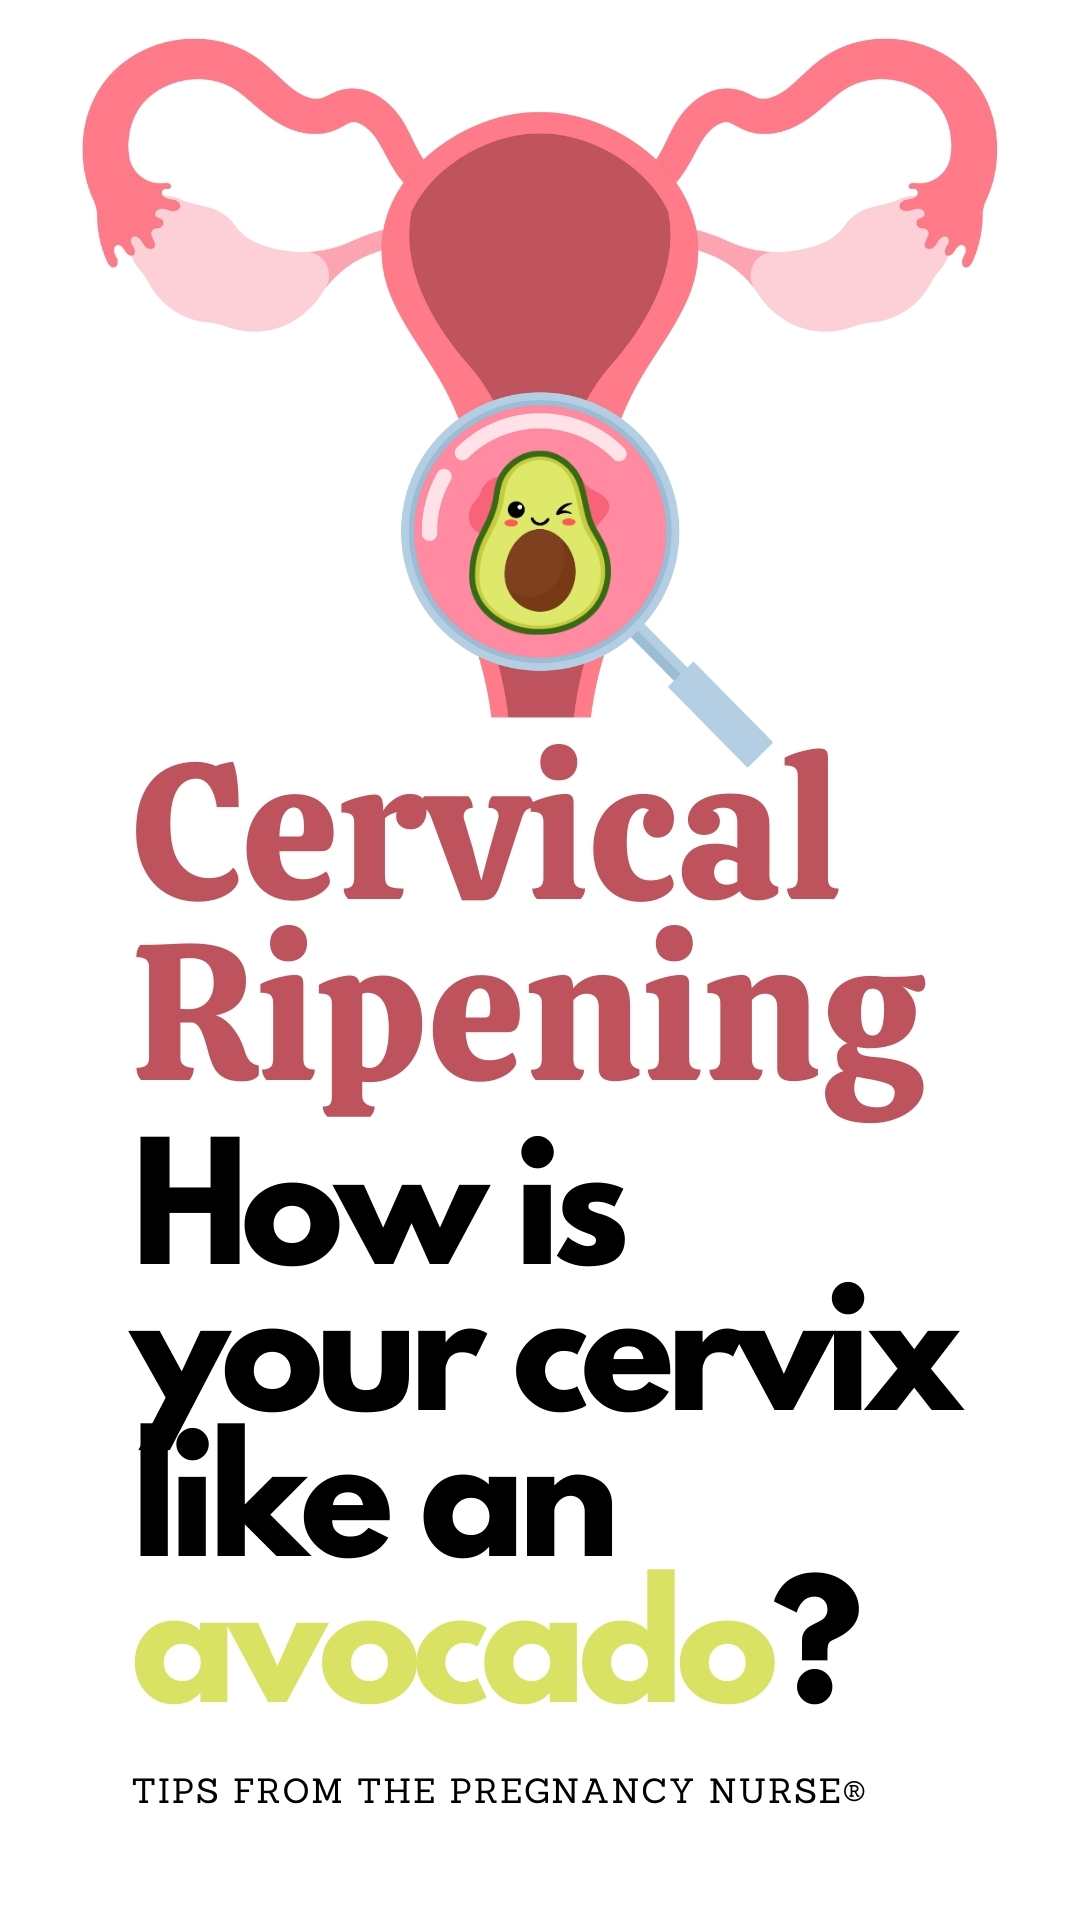 uterus, with an avocado over the cervix in a magnifying glass / cervical ripening, how is your cervix like an avocado?